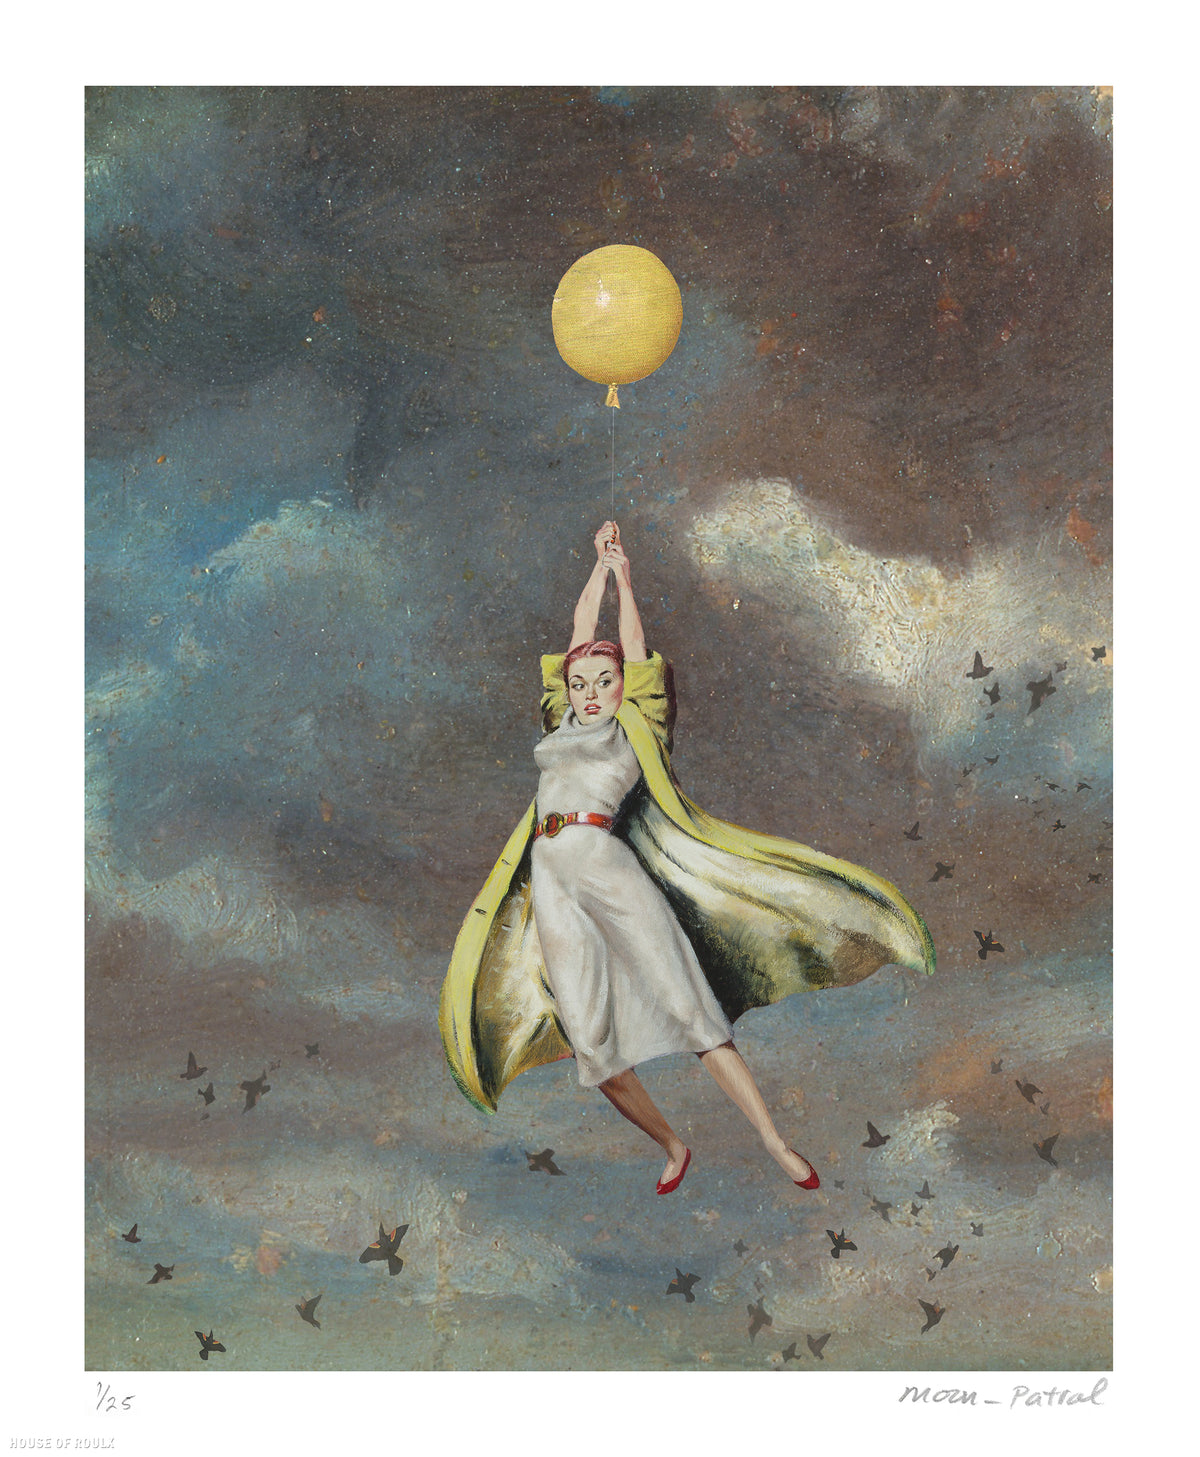 Moon Patrol &quot;Balloon Incident&quot; - Archival Print, Limited Edition of 25 - 14 x 17&quot;